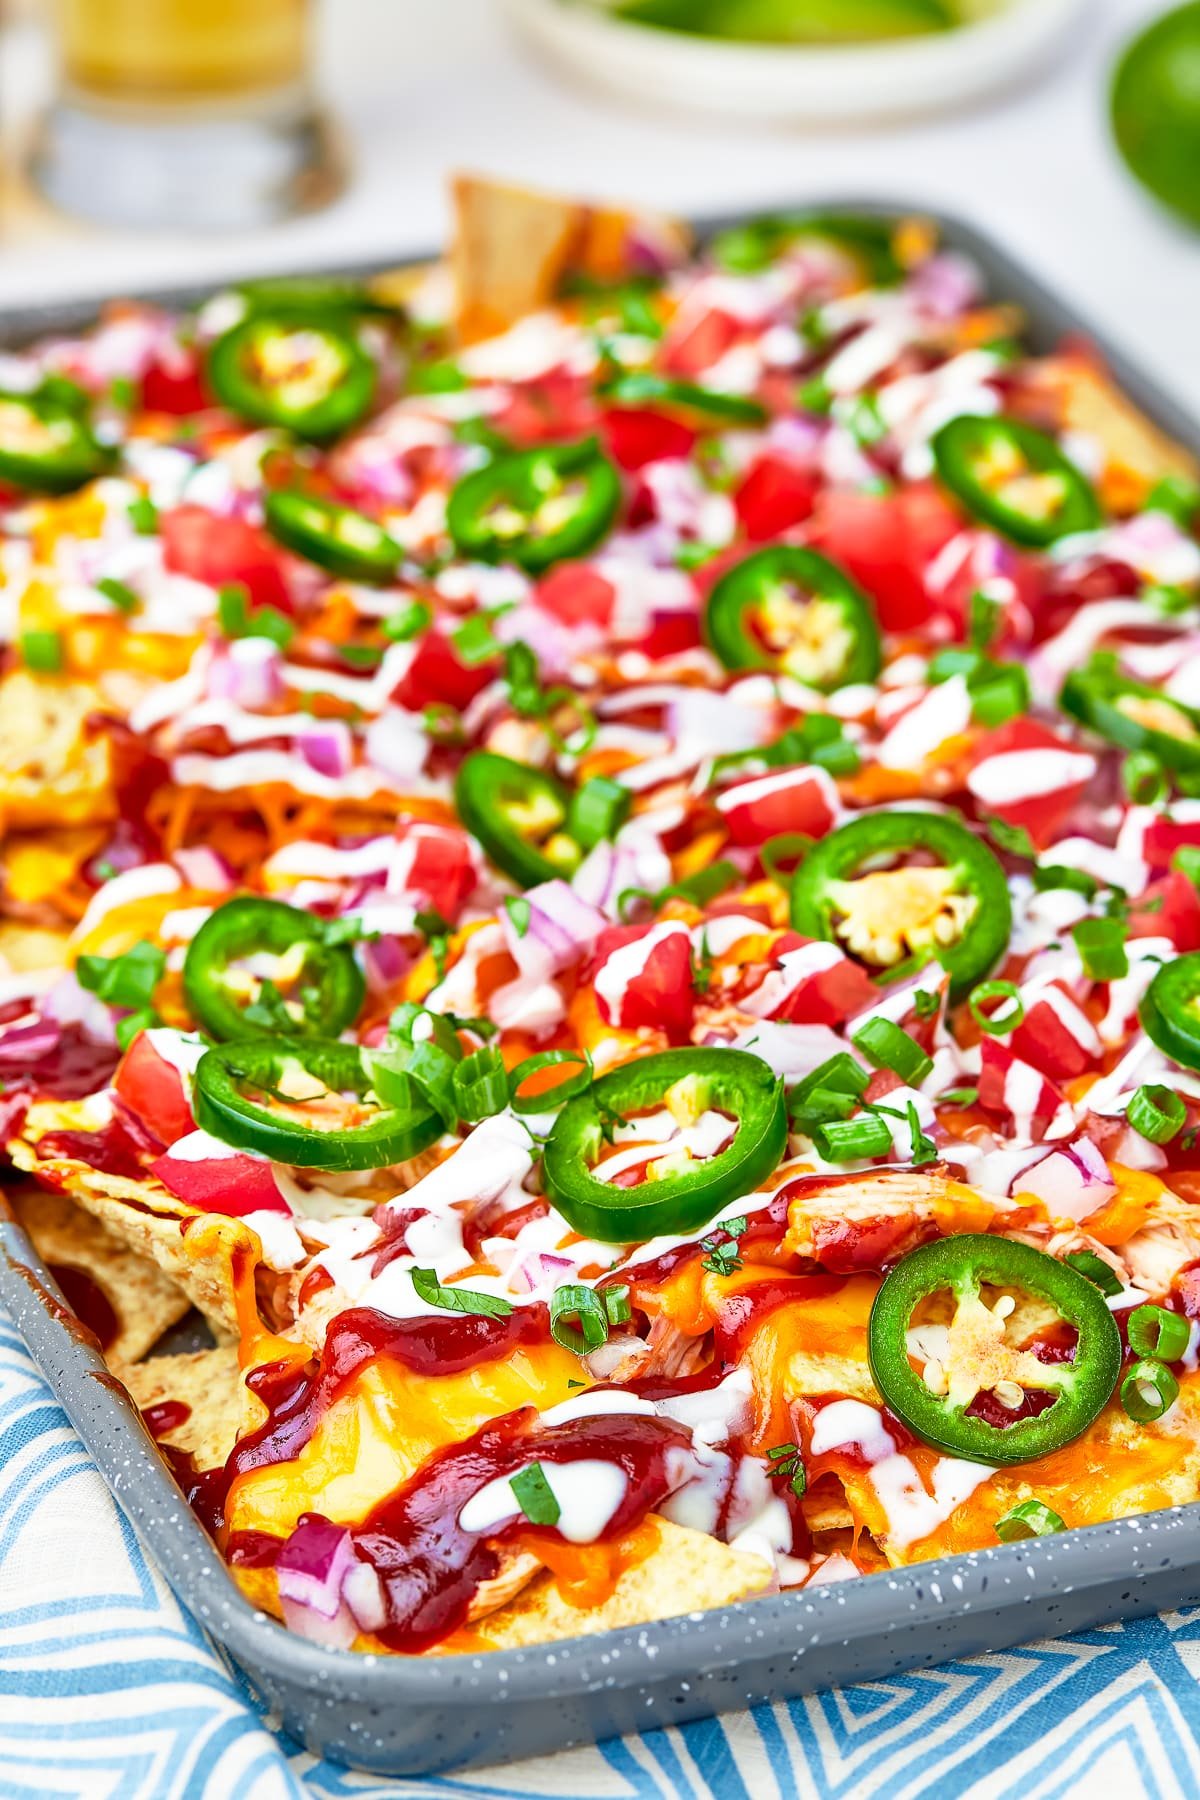 45 degree angle of BBQ Chicken Nachos on a sheet tray with lots of yummy toppings